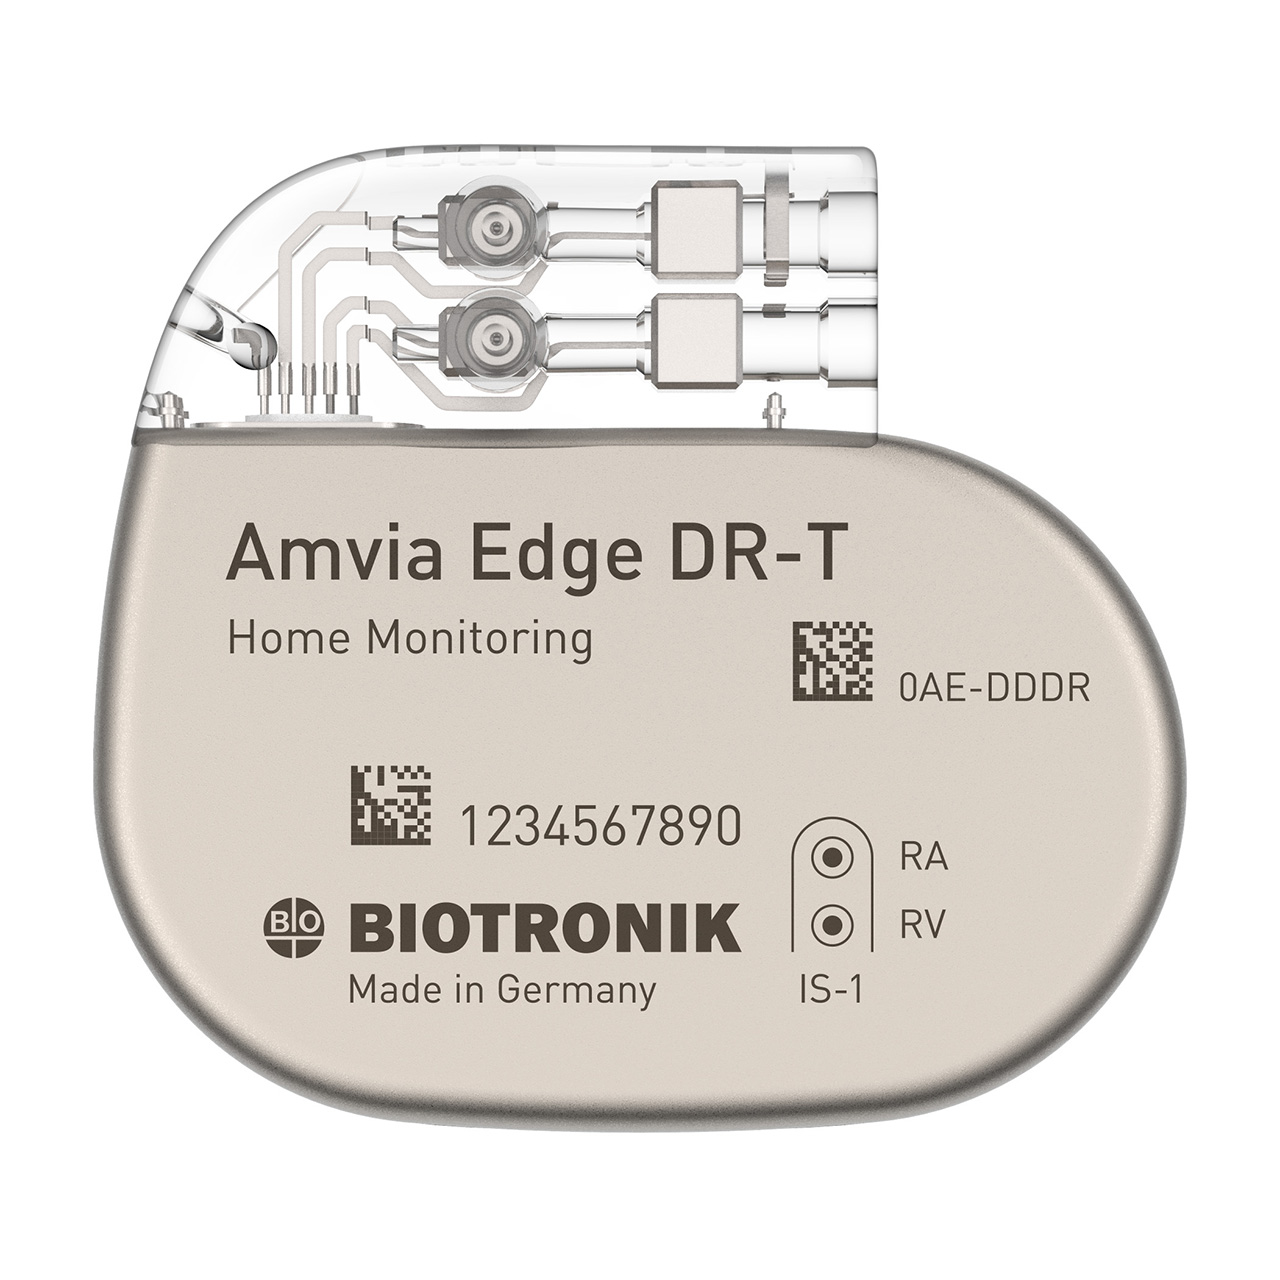 Amvia Edge DR-T dual-chamber pacemaker